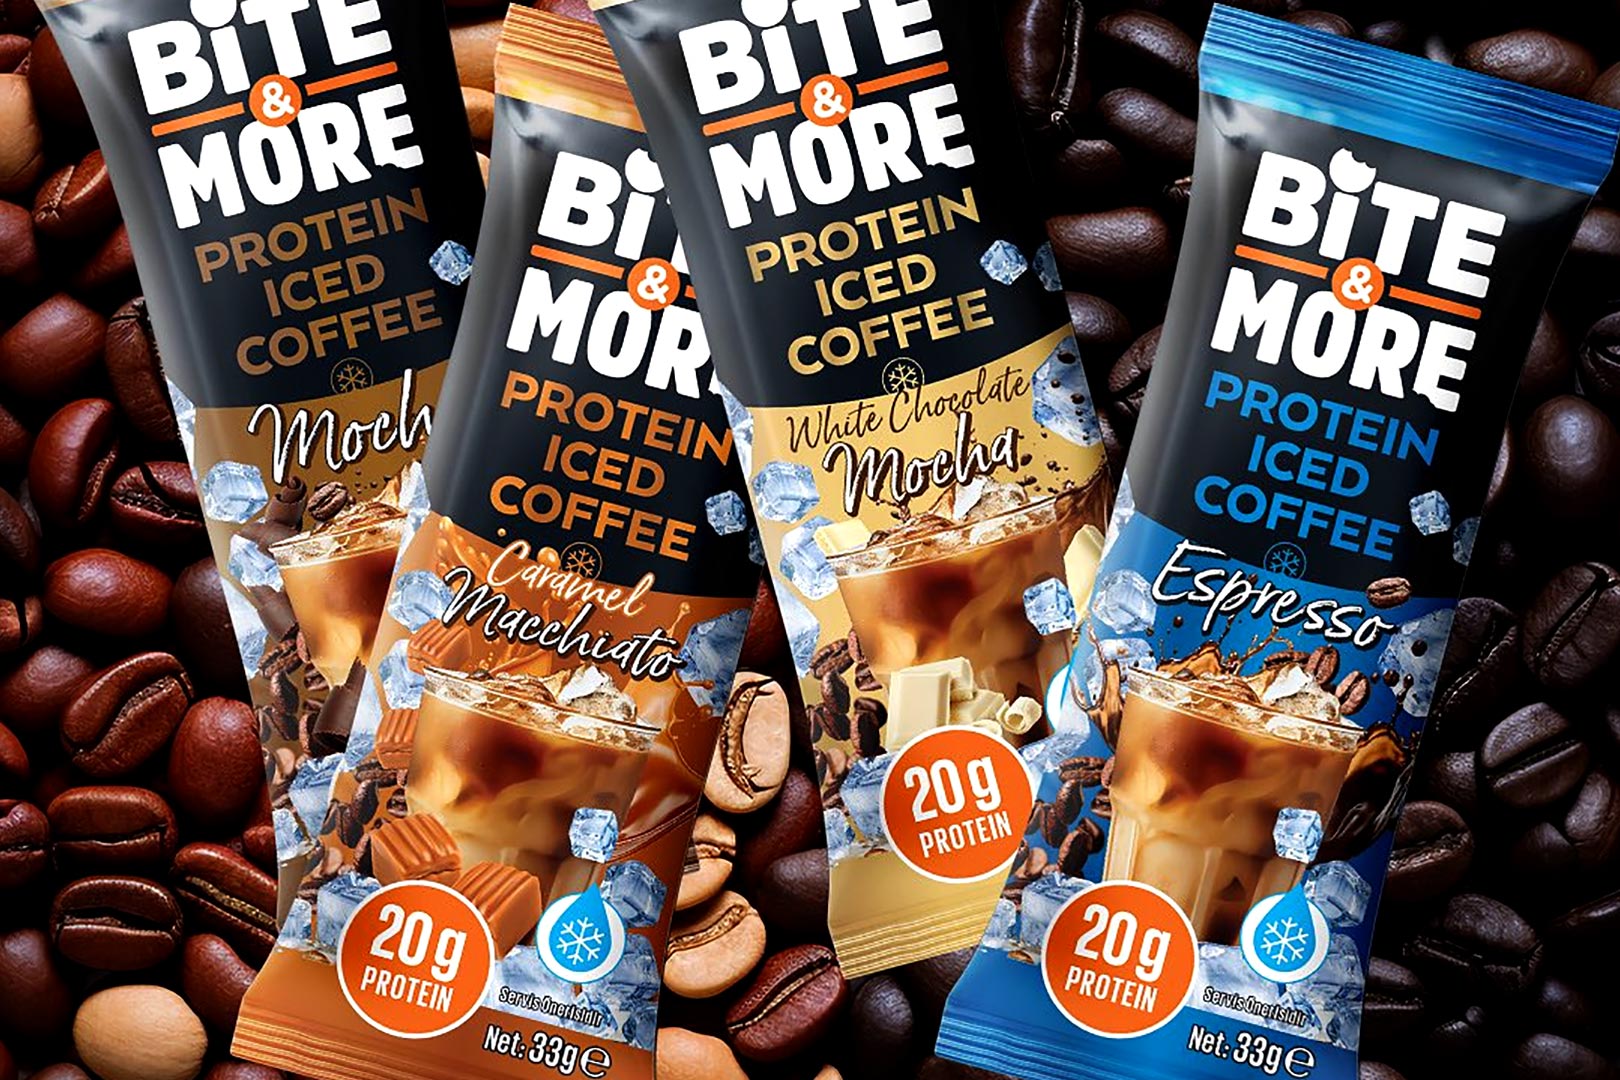 Bite And More Protein Iced Coffee